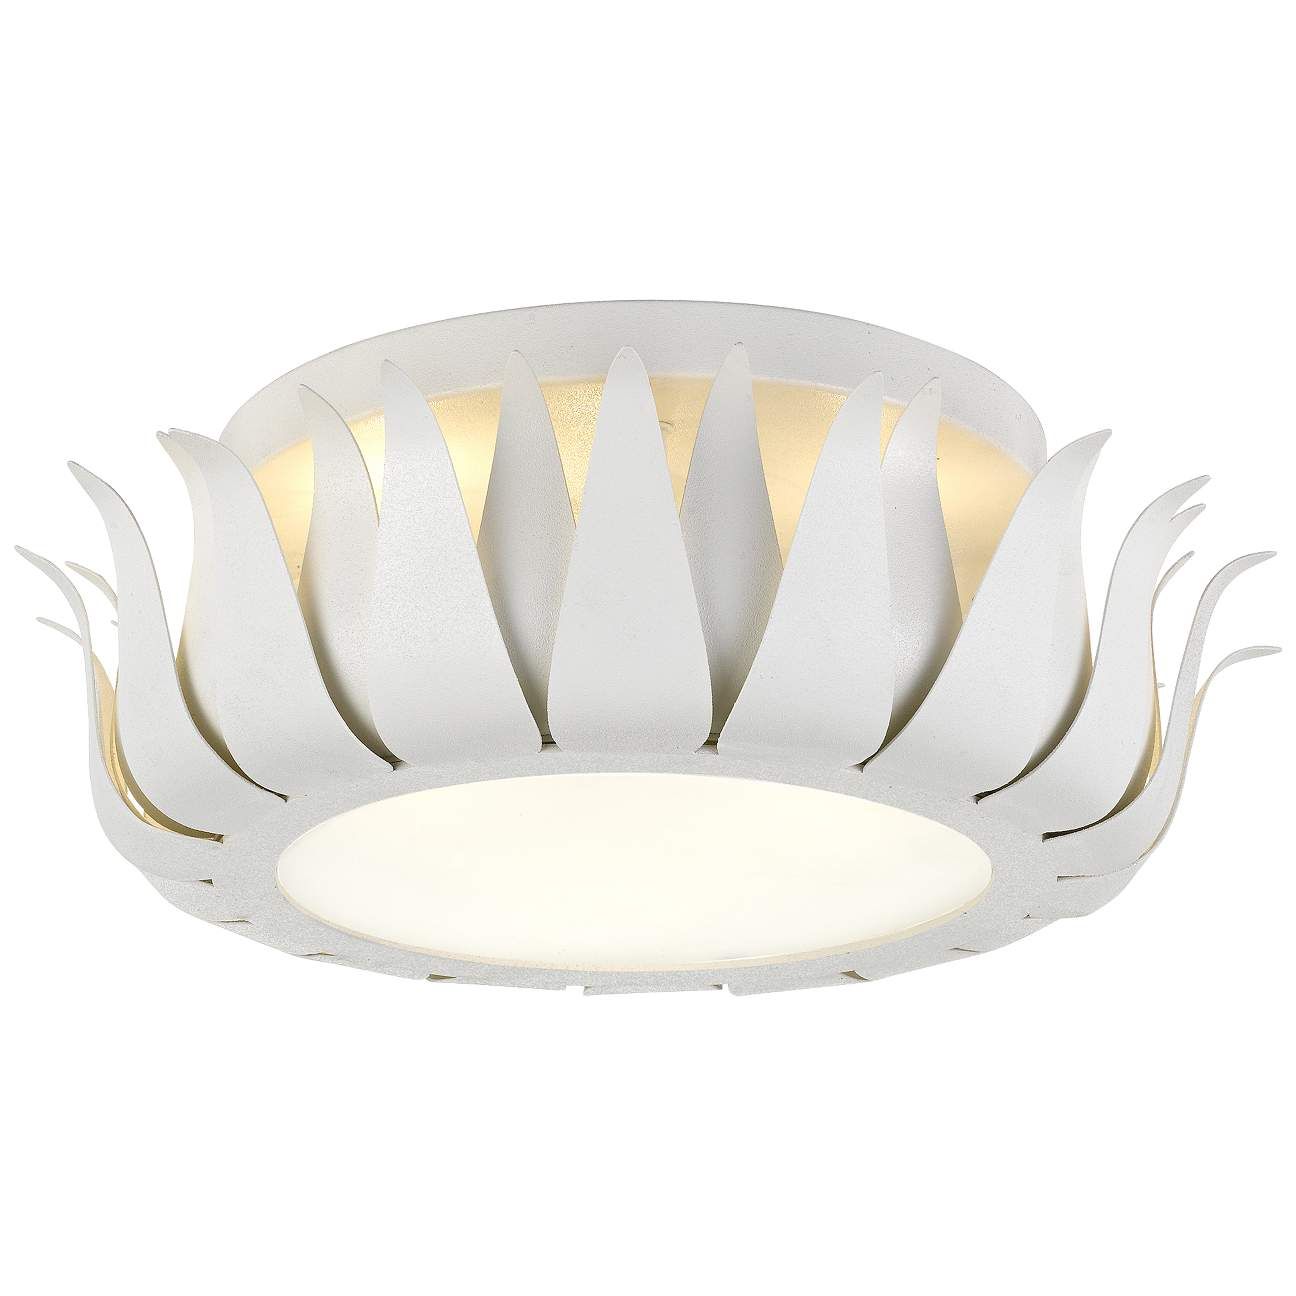 Crystorama Broche 16" Wide Floral Matte White Ceiling Light | Lamps Plus